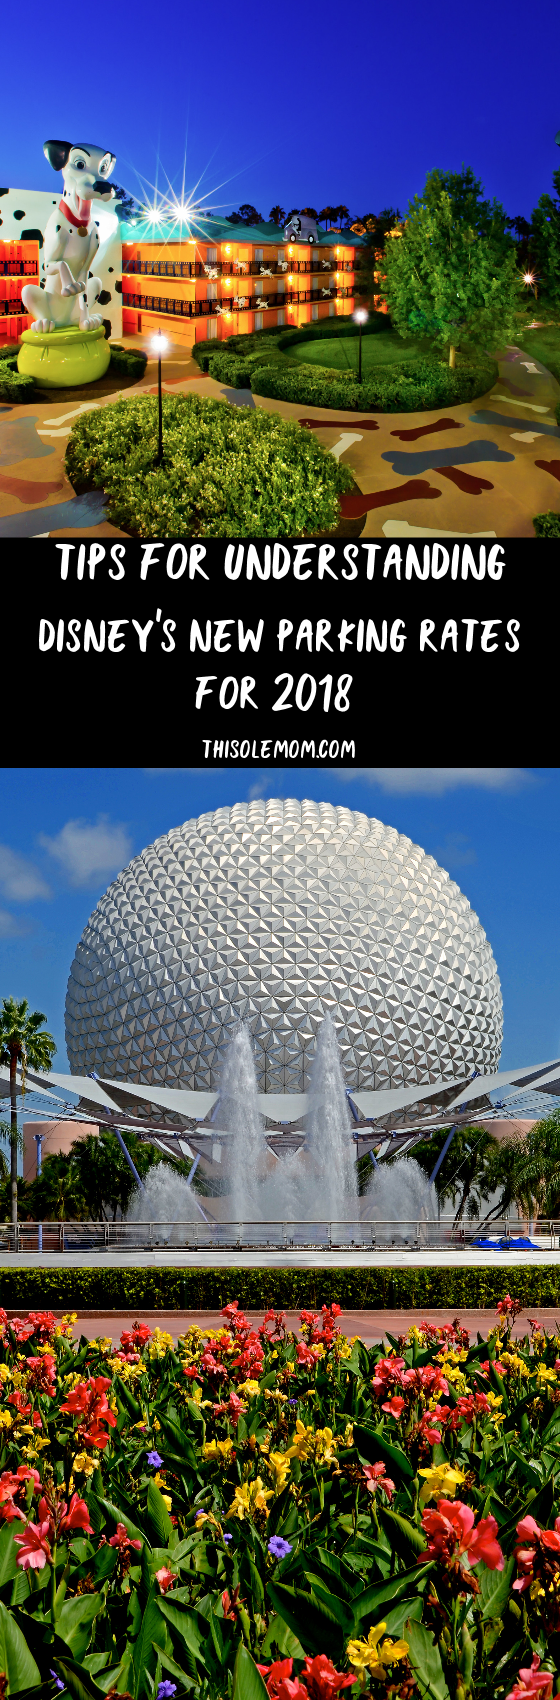 Tips for Understanding Disney’s New Parking Rates for 2018